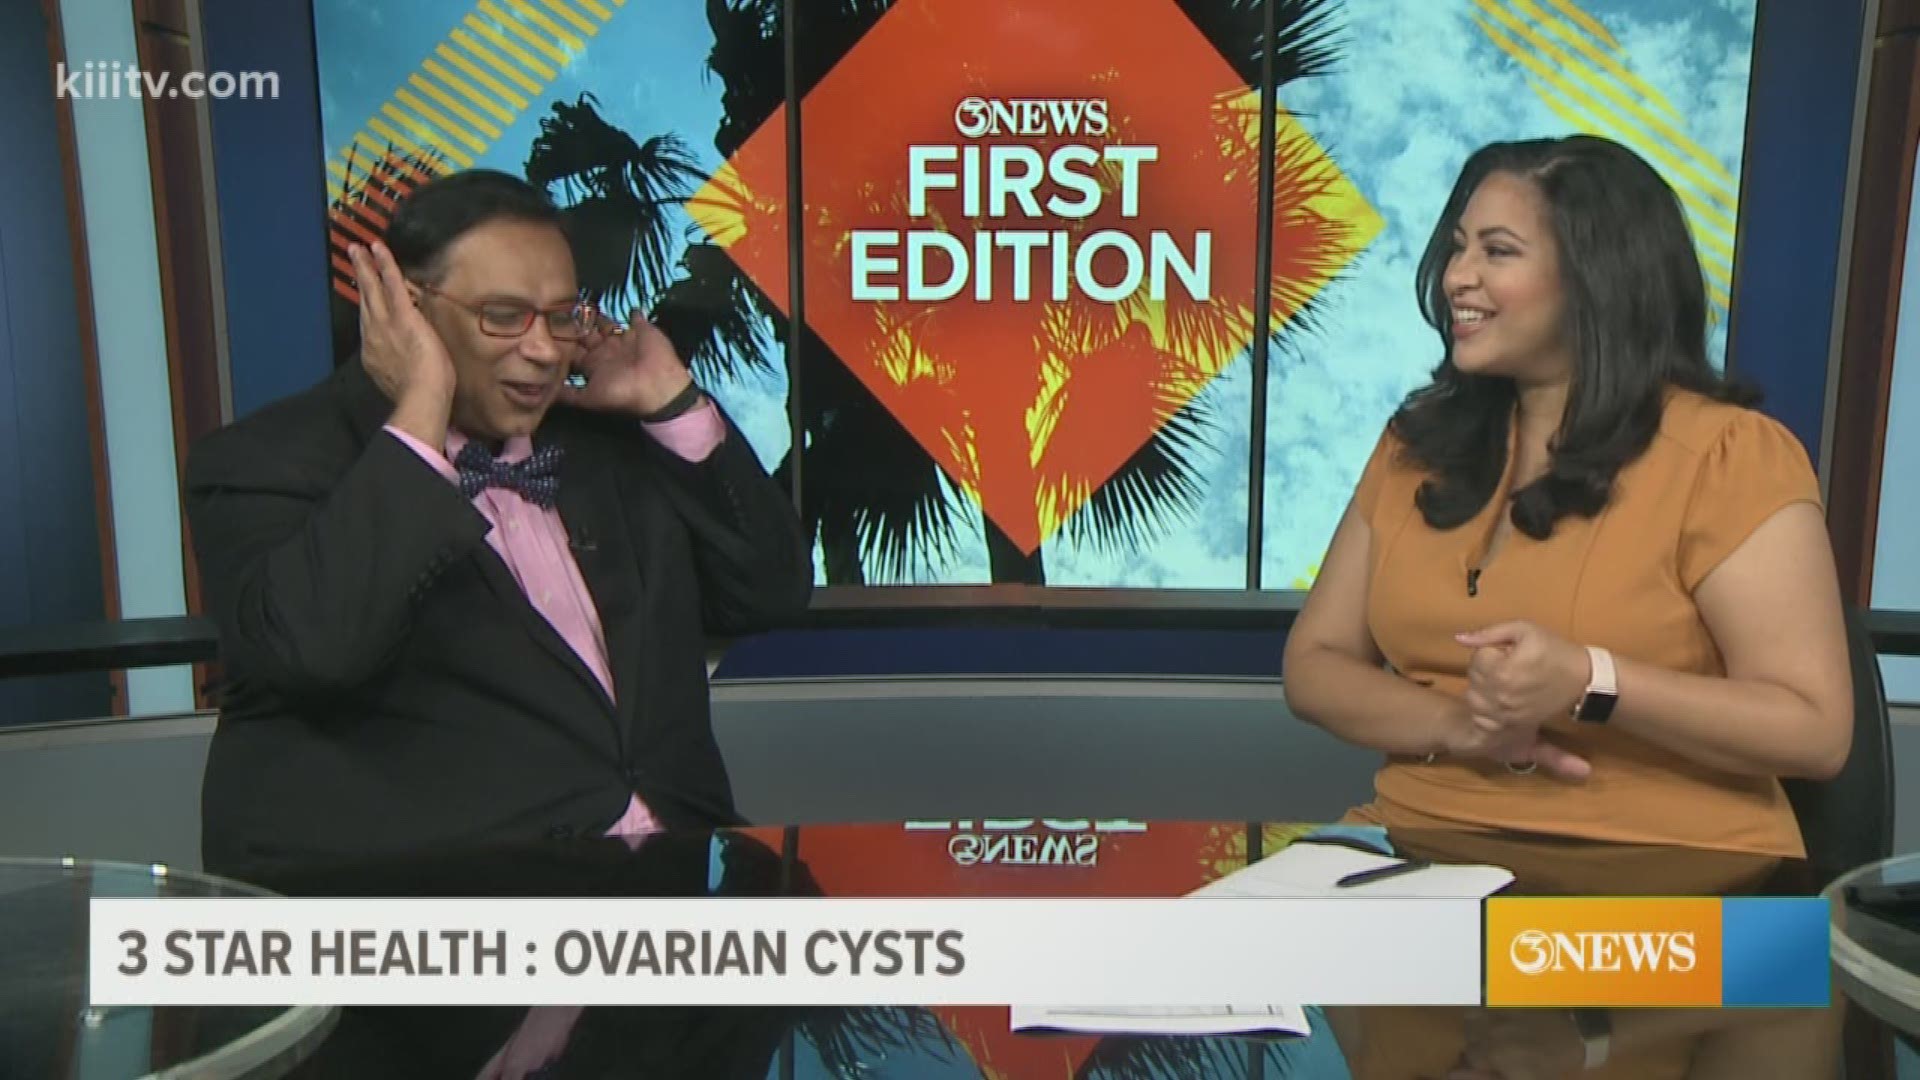 Ovarian cysts can affect many women throughout their lives.